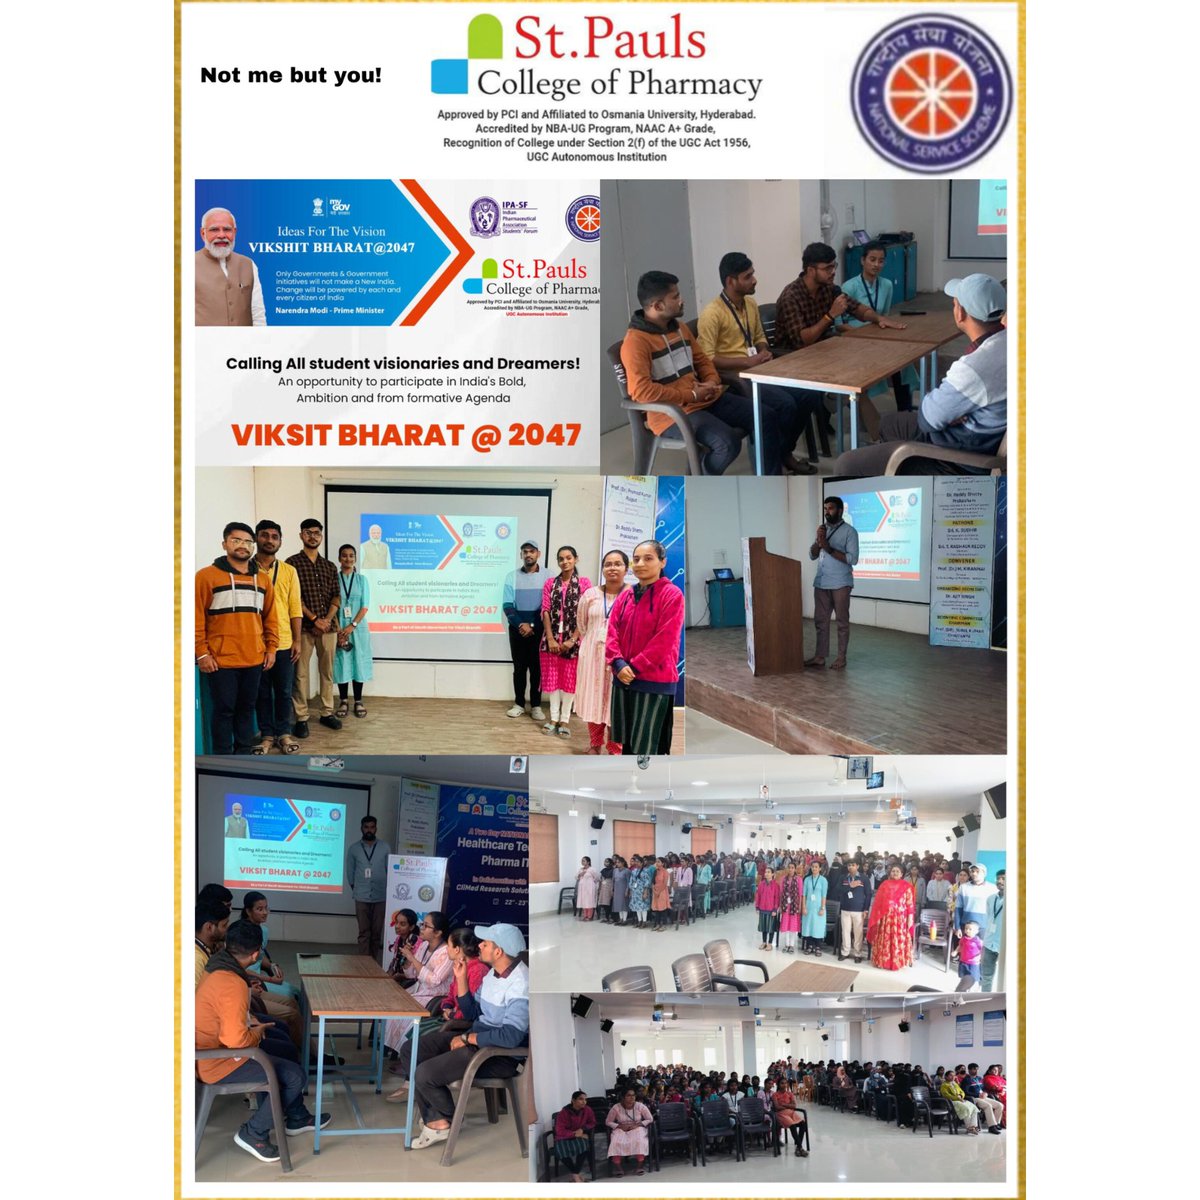 We NSS St. Pauls Unit have organised a seminar on #India's #AmritKal & things to be developed to make 𝐈𝐧𝐝𝐢𝐚 𝐚𝐬 𝐚 #ViksitBharat.

#StPauls #StPaulsPharmacyCollege #ViksitBharat2047 #Seminar #Ideas #Development #Opportunities #Technologies #GroupDiscussions #Debates #Topics